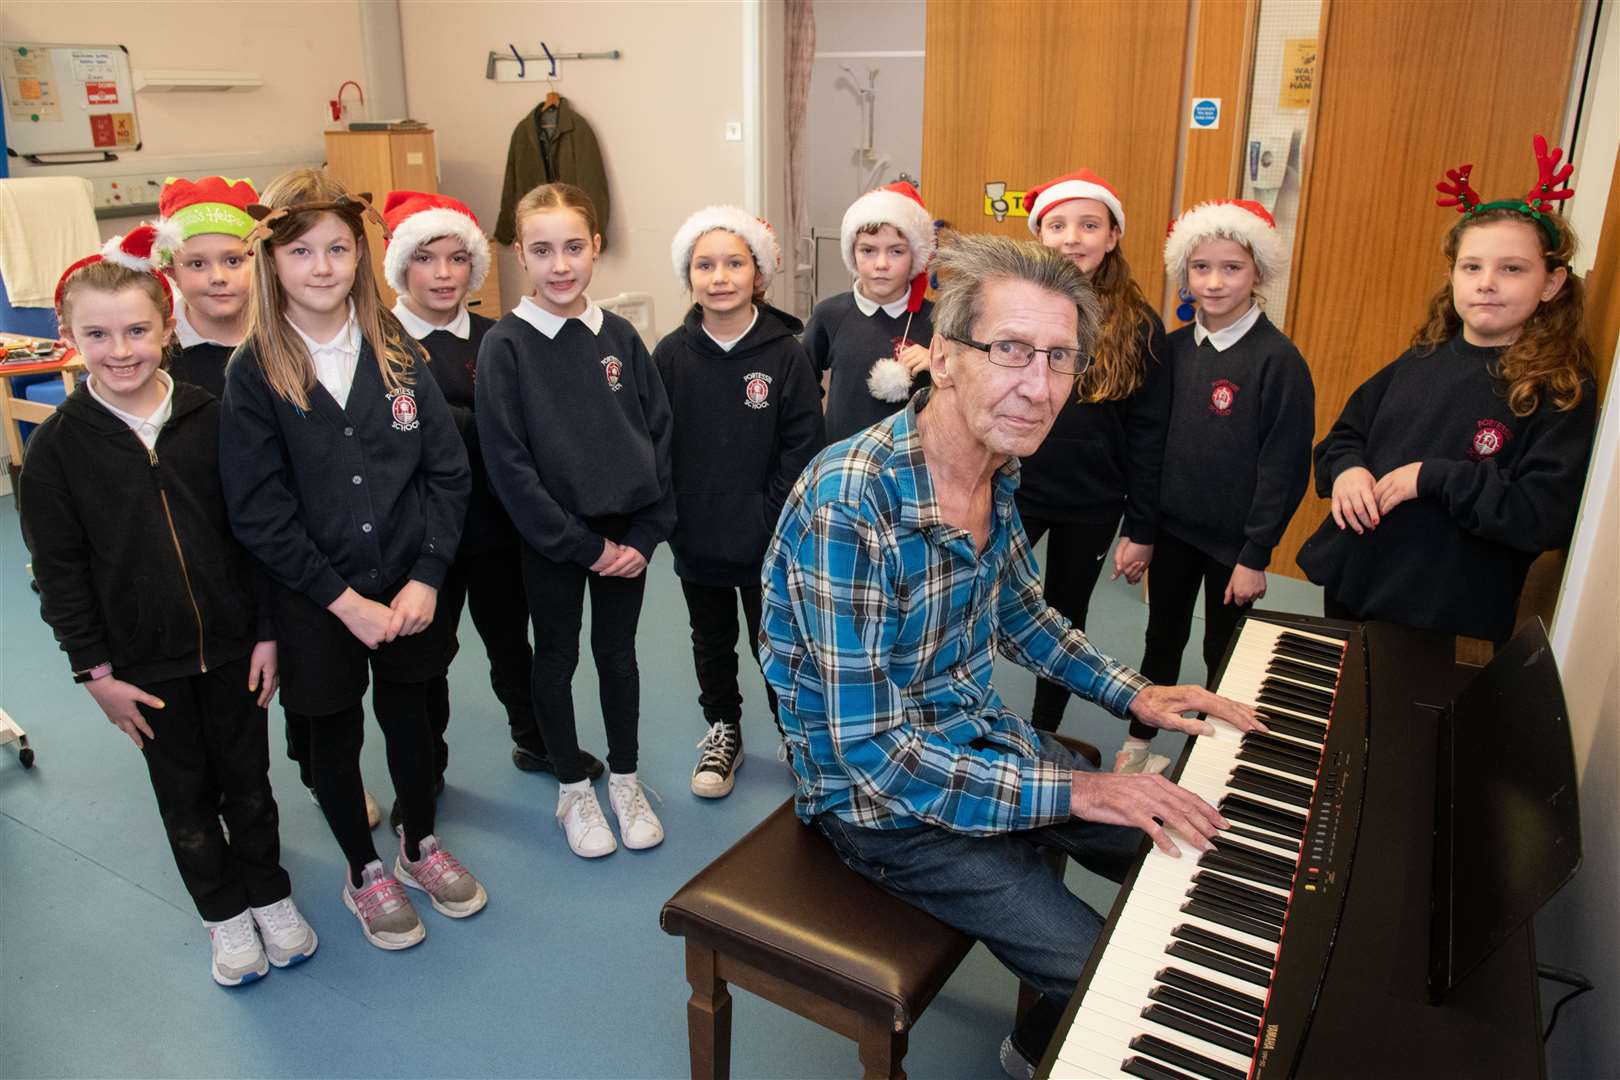 Patient Ziggy plays the piano as the Portessie kids sing some festive tunes. Picture: Daniel Forsyth